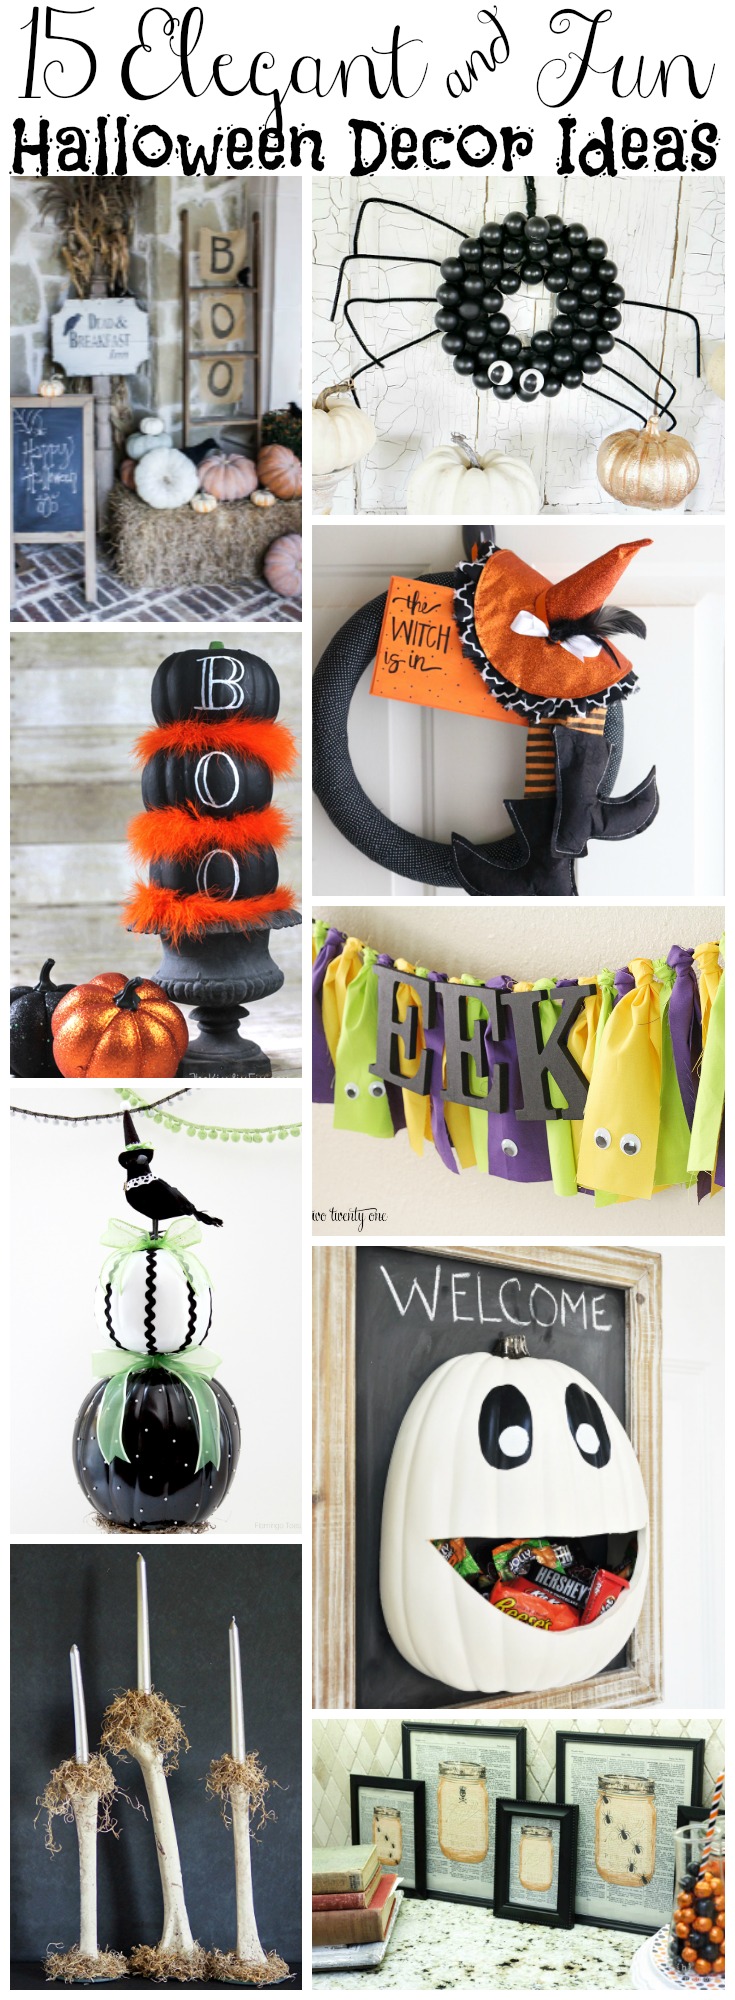 15-elegant-and-fun-halloween-decor-ideas-featured-from-work-it-wednesday